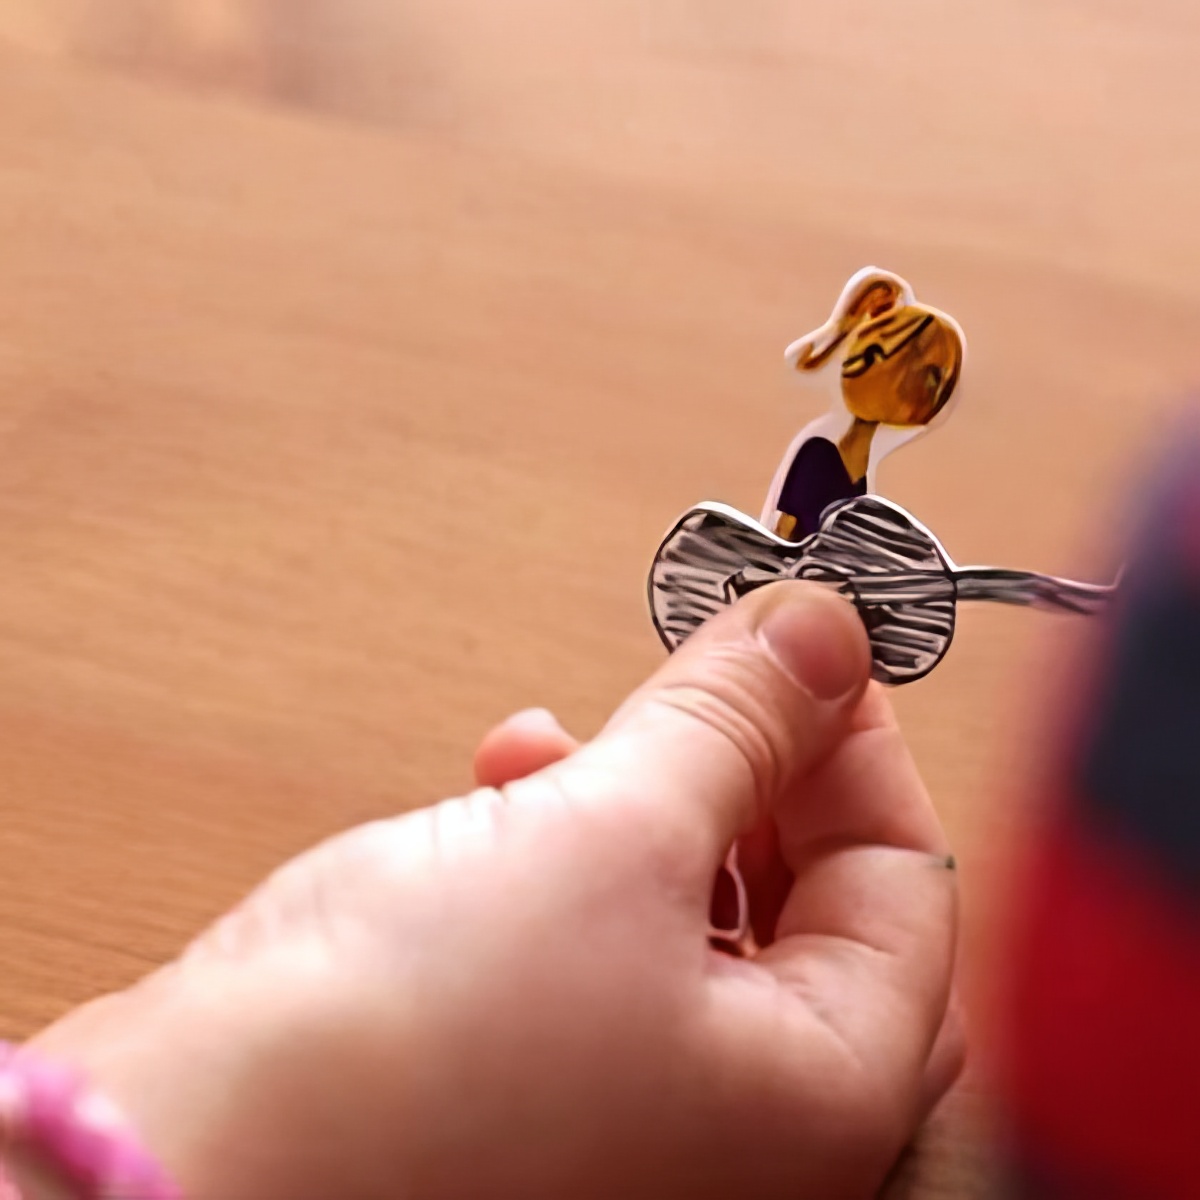 Make this mini paper dolls together with your kids and have fun playing indoors!